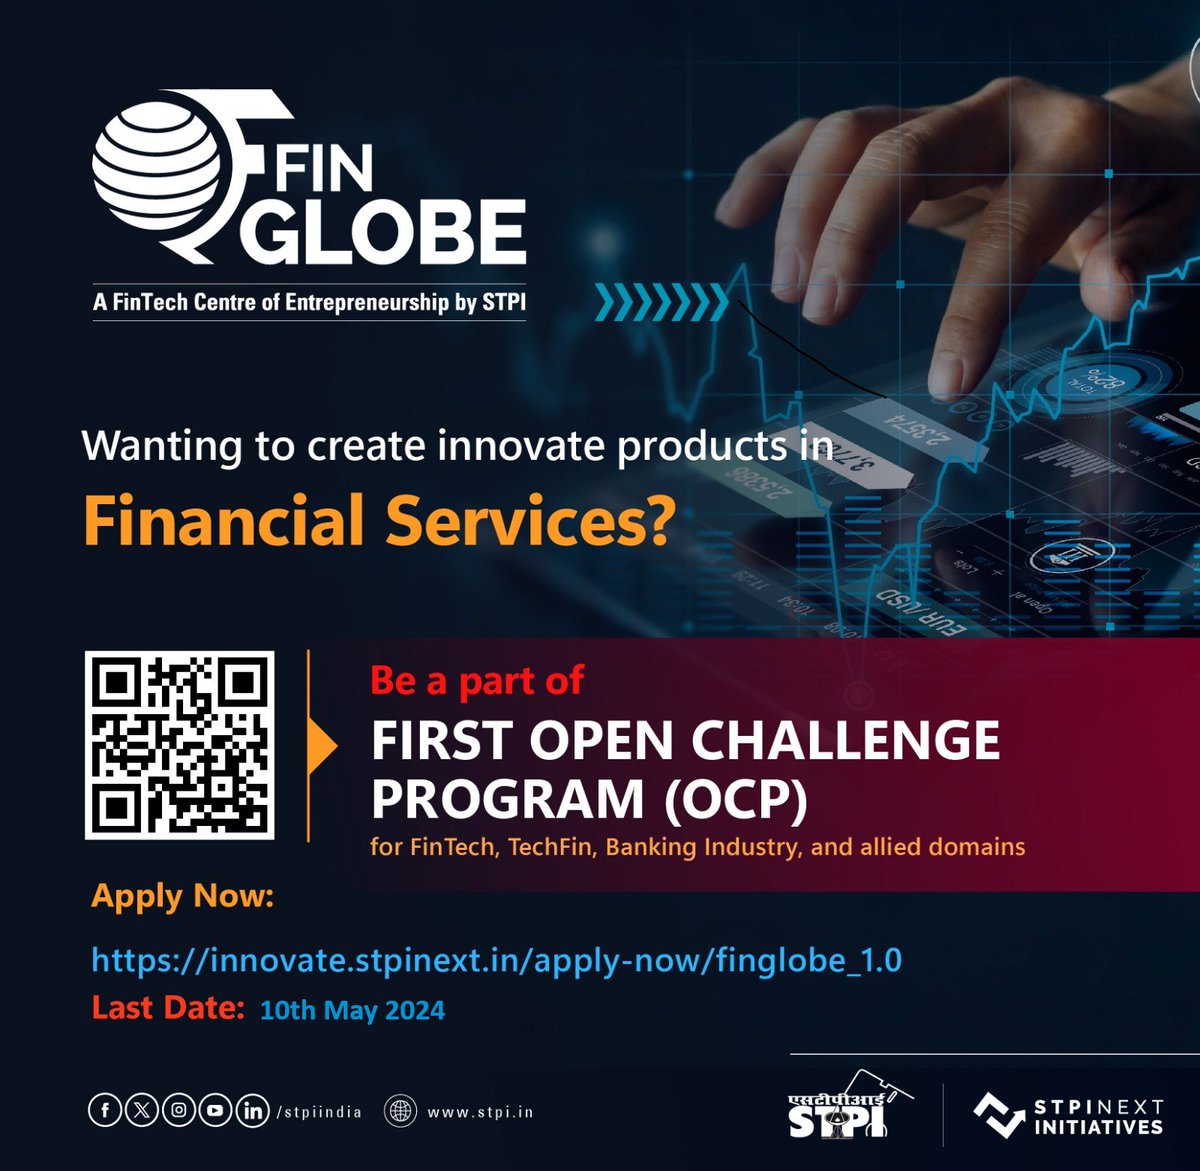 Only 2 days left!⏳ 

Send your application for the First Open Challenge Program of FinGlobe CoE before 10 May 2024.

Apply Now: innovate.stpinext.in/about-us/fingl…

Discover more: finglobe.stpi.in

#STPIINDIA #StartupIndia @arvindtw